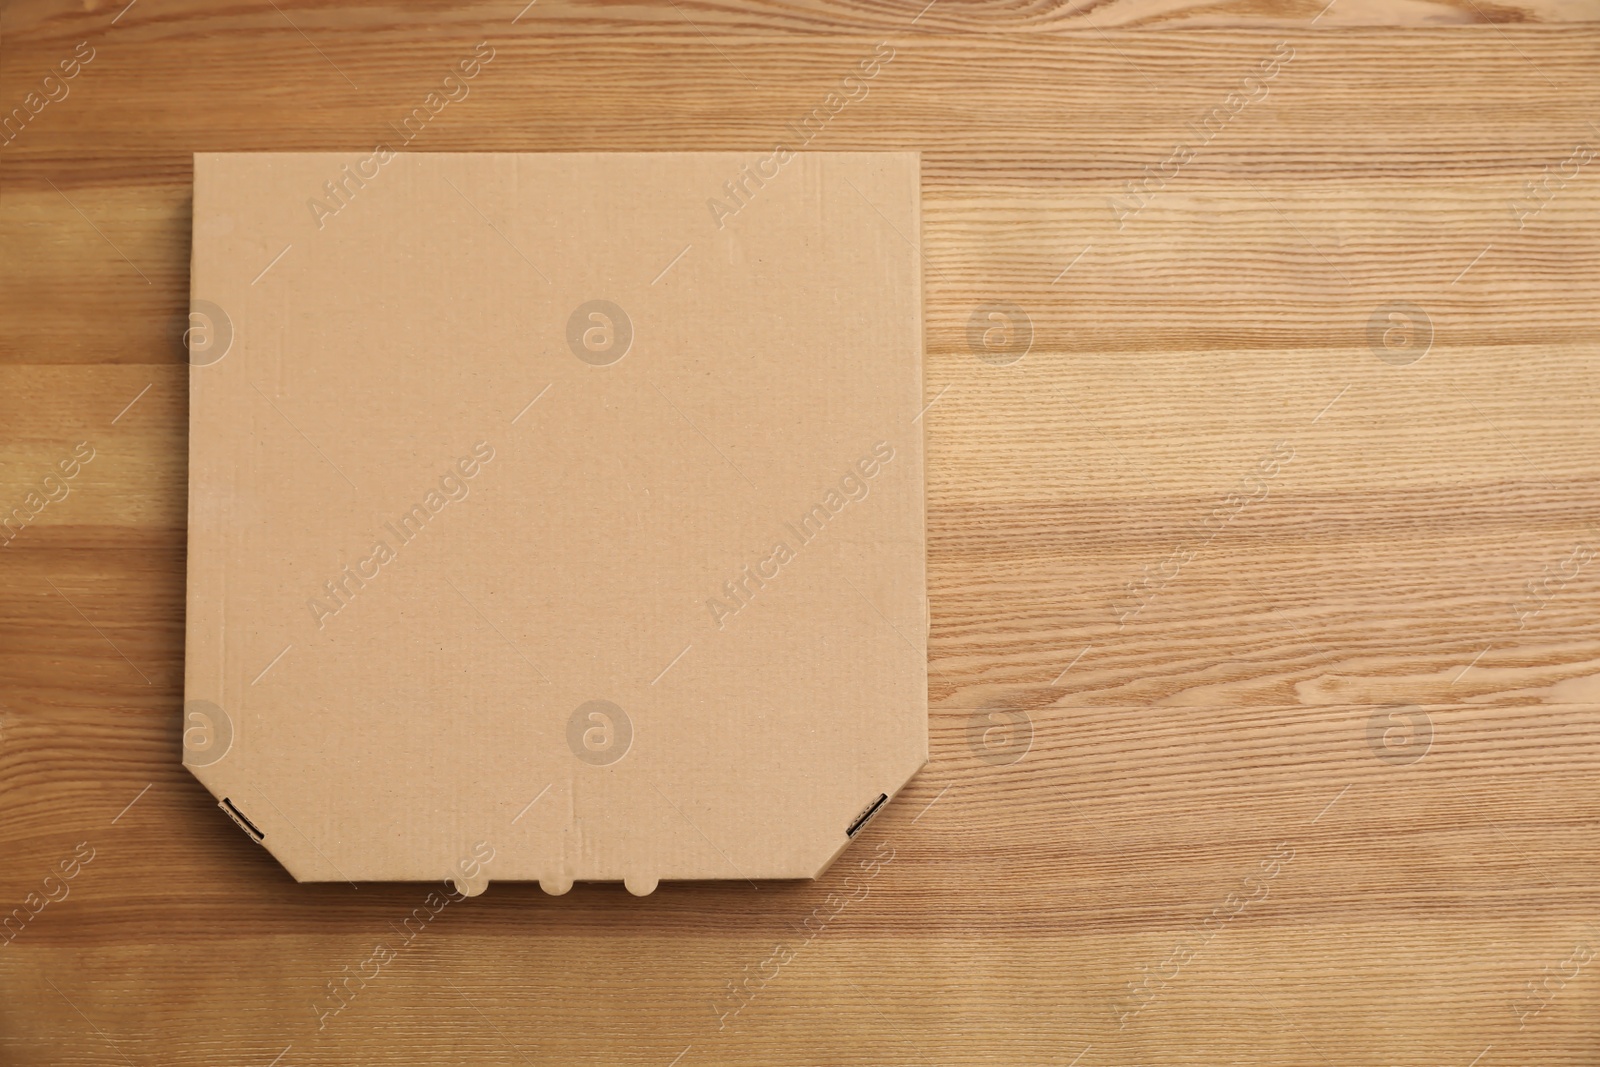 Photo of Cardboard pizza box on wooden background, top view. Mockup for design